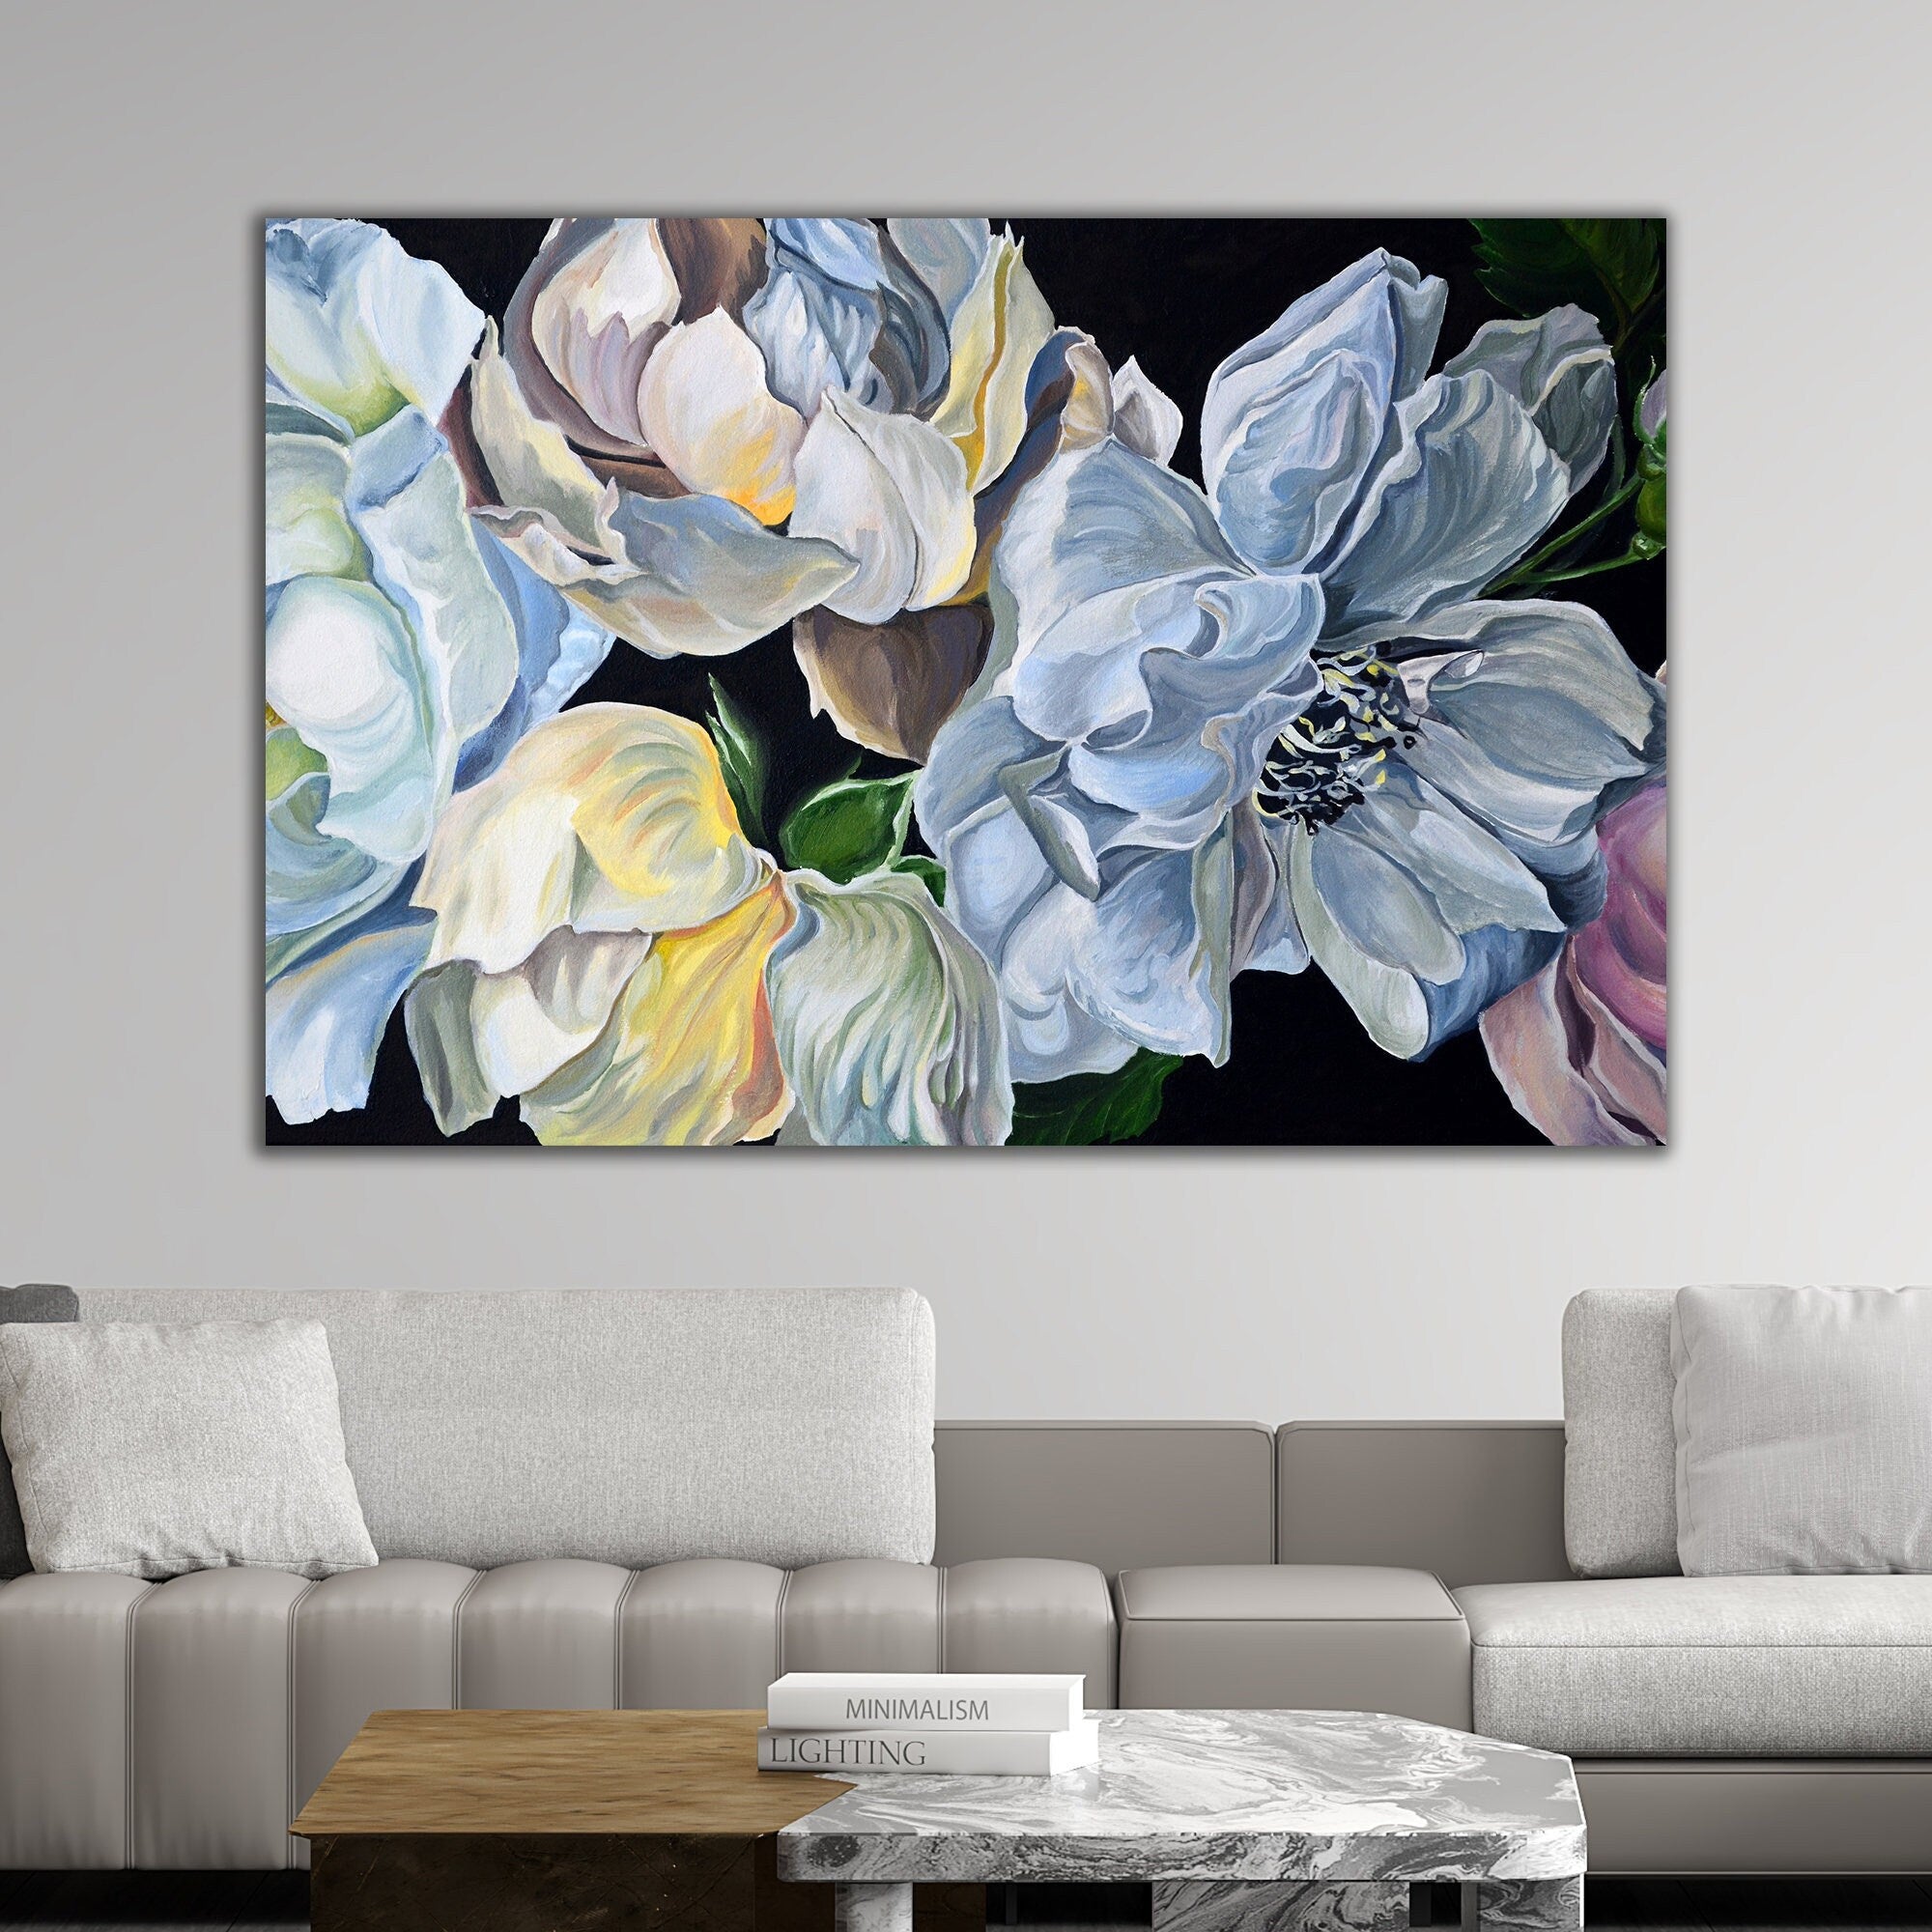 flowers canvas painting, magnolia floral print, floral home decor, black and white floral wall art